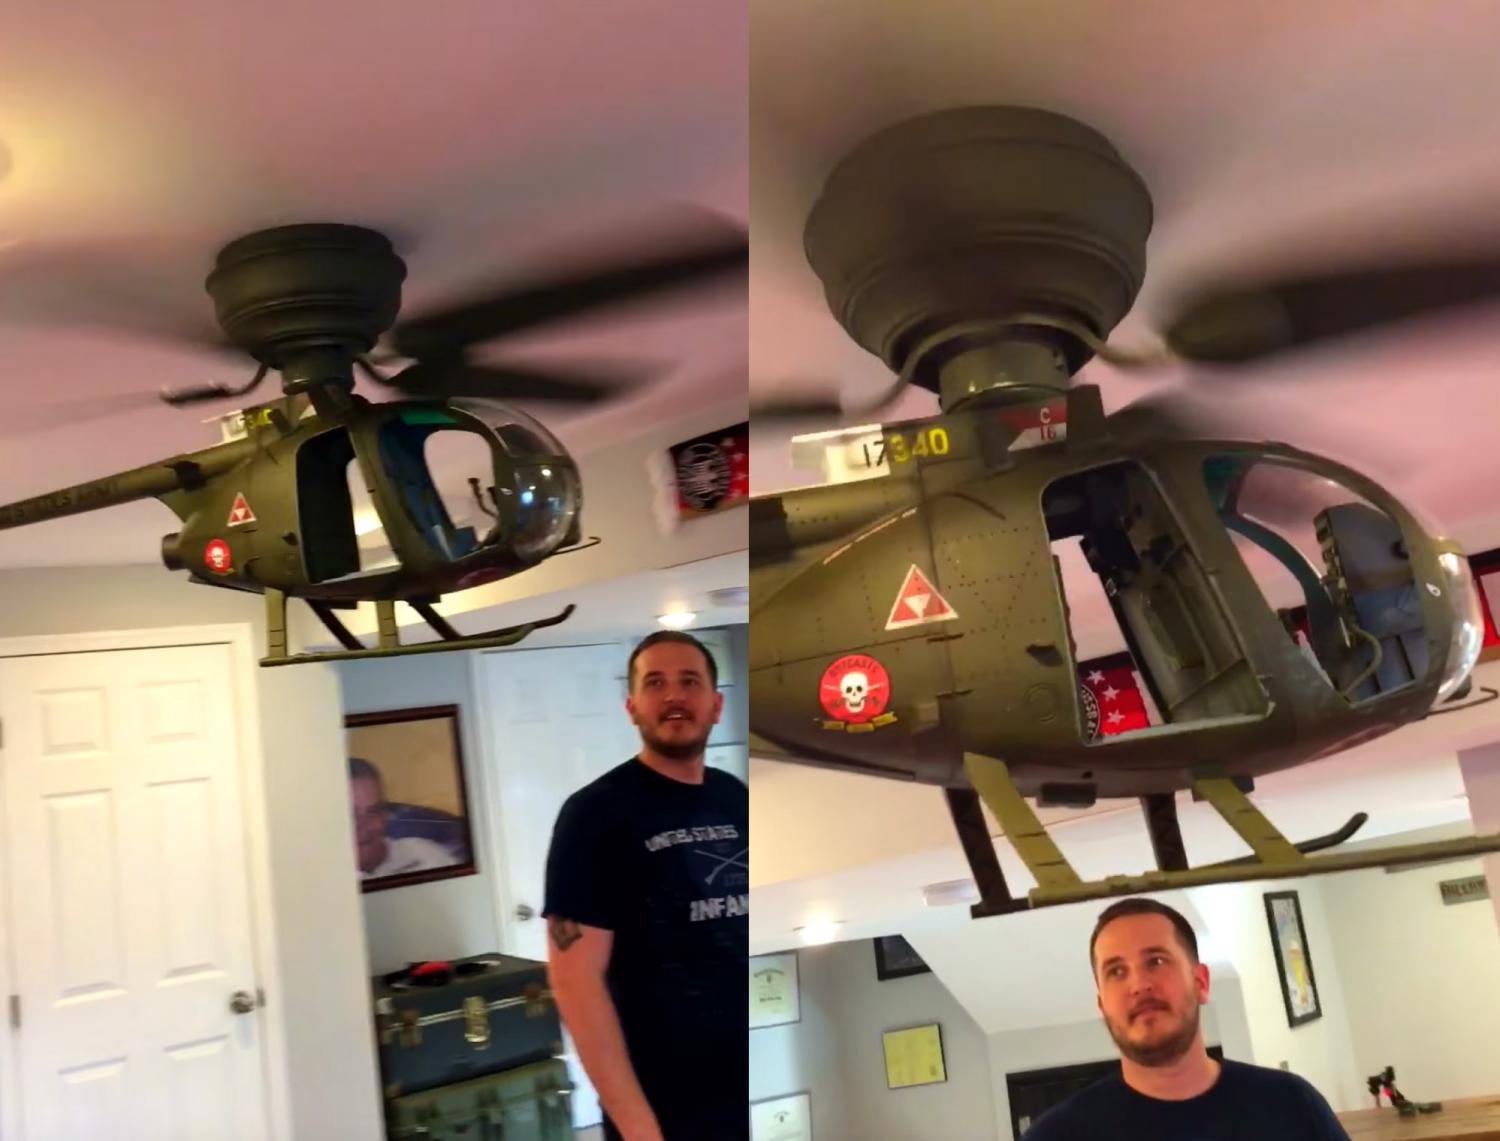 DIY Helicopter Ceiling Fan - How to turn your ceiling fan into a helicopter